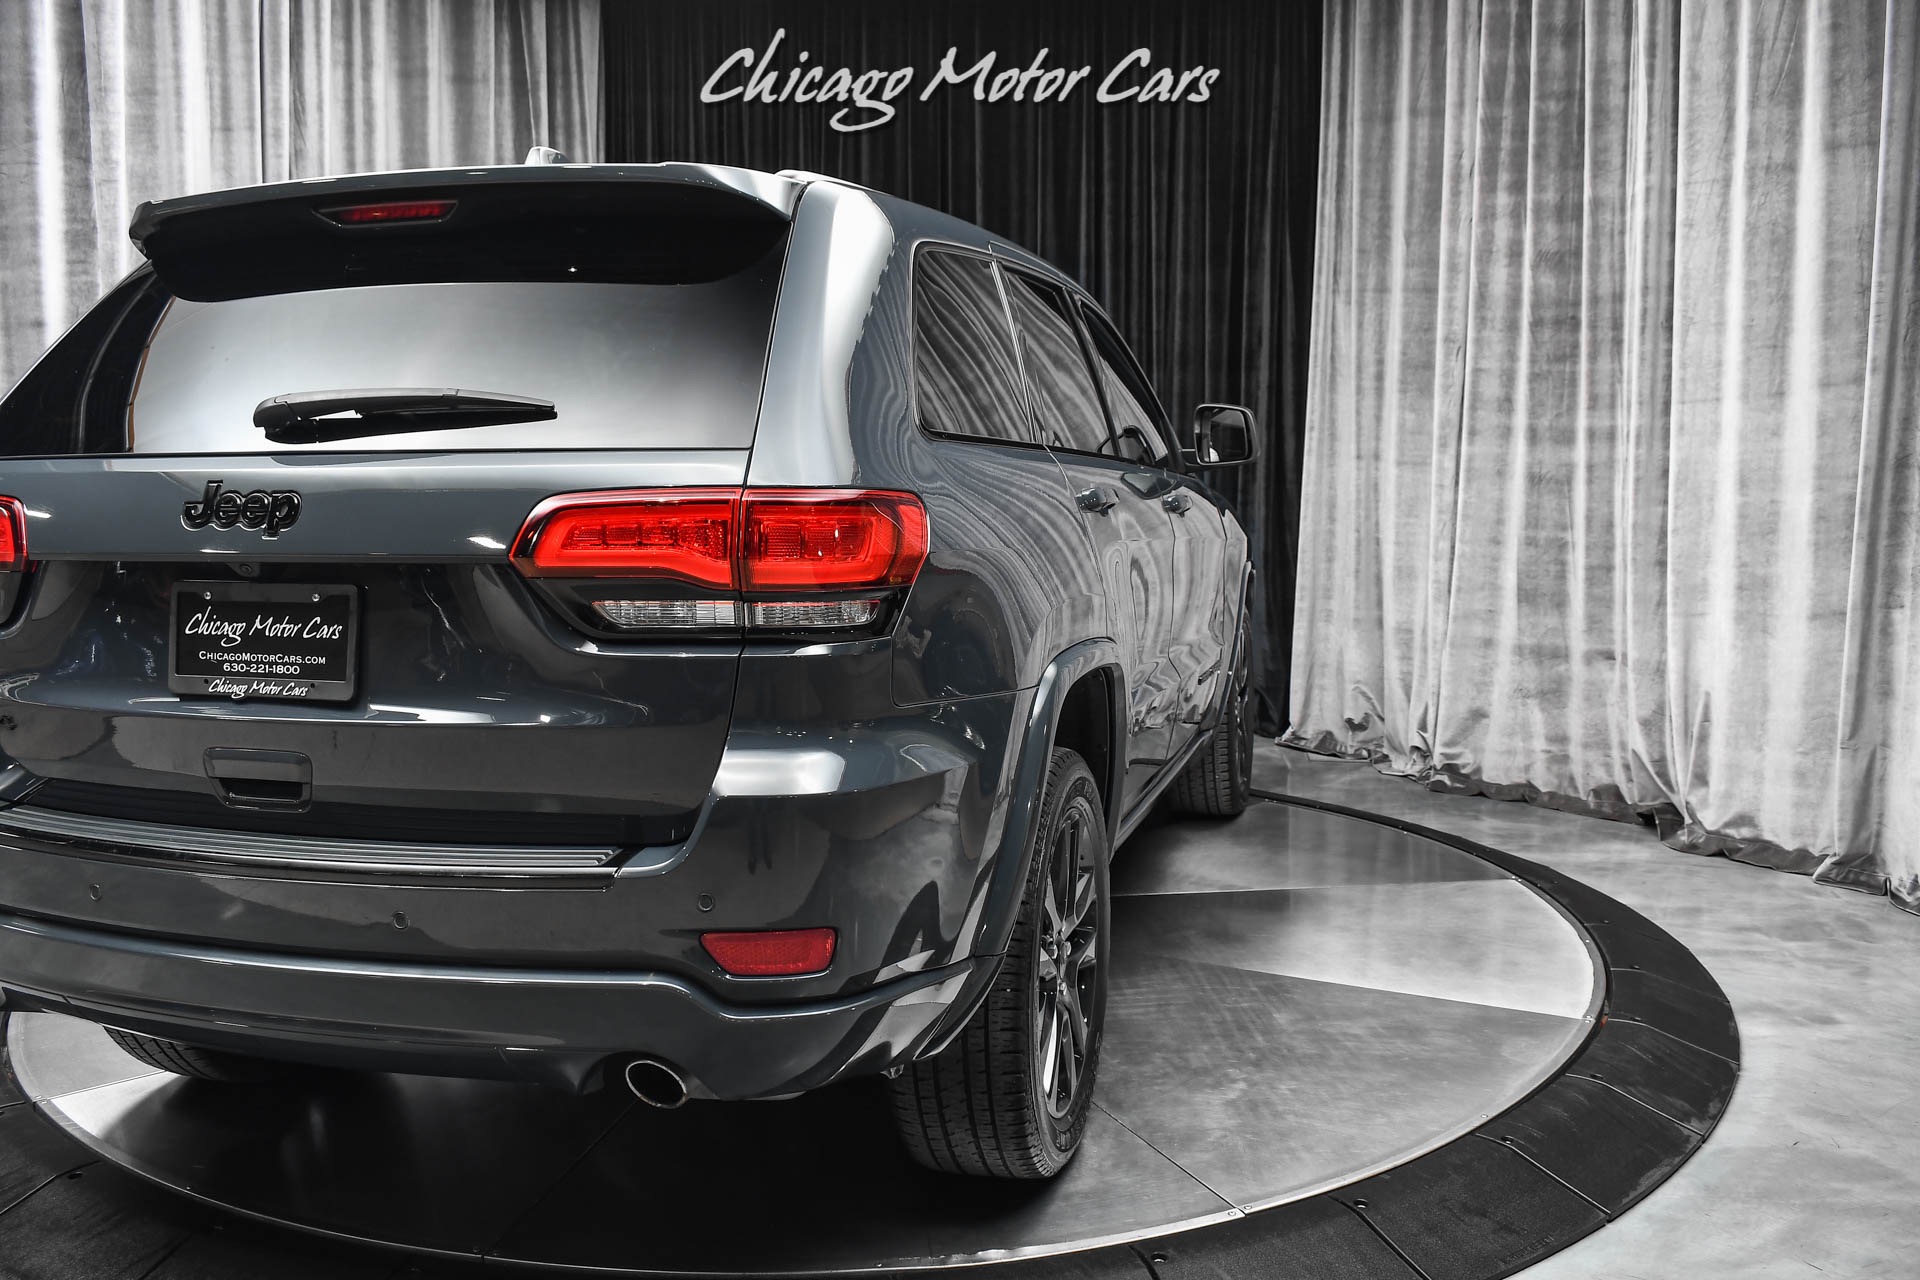 Used 2017 Jeep Grand Cherokee Altitude SUV RARE Rhino Grey Paint UConnect  8.4 Display 20inch Wheels For Sale (Special Pricing)